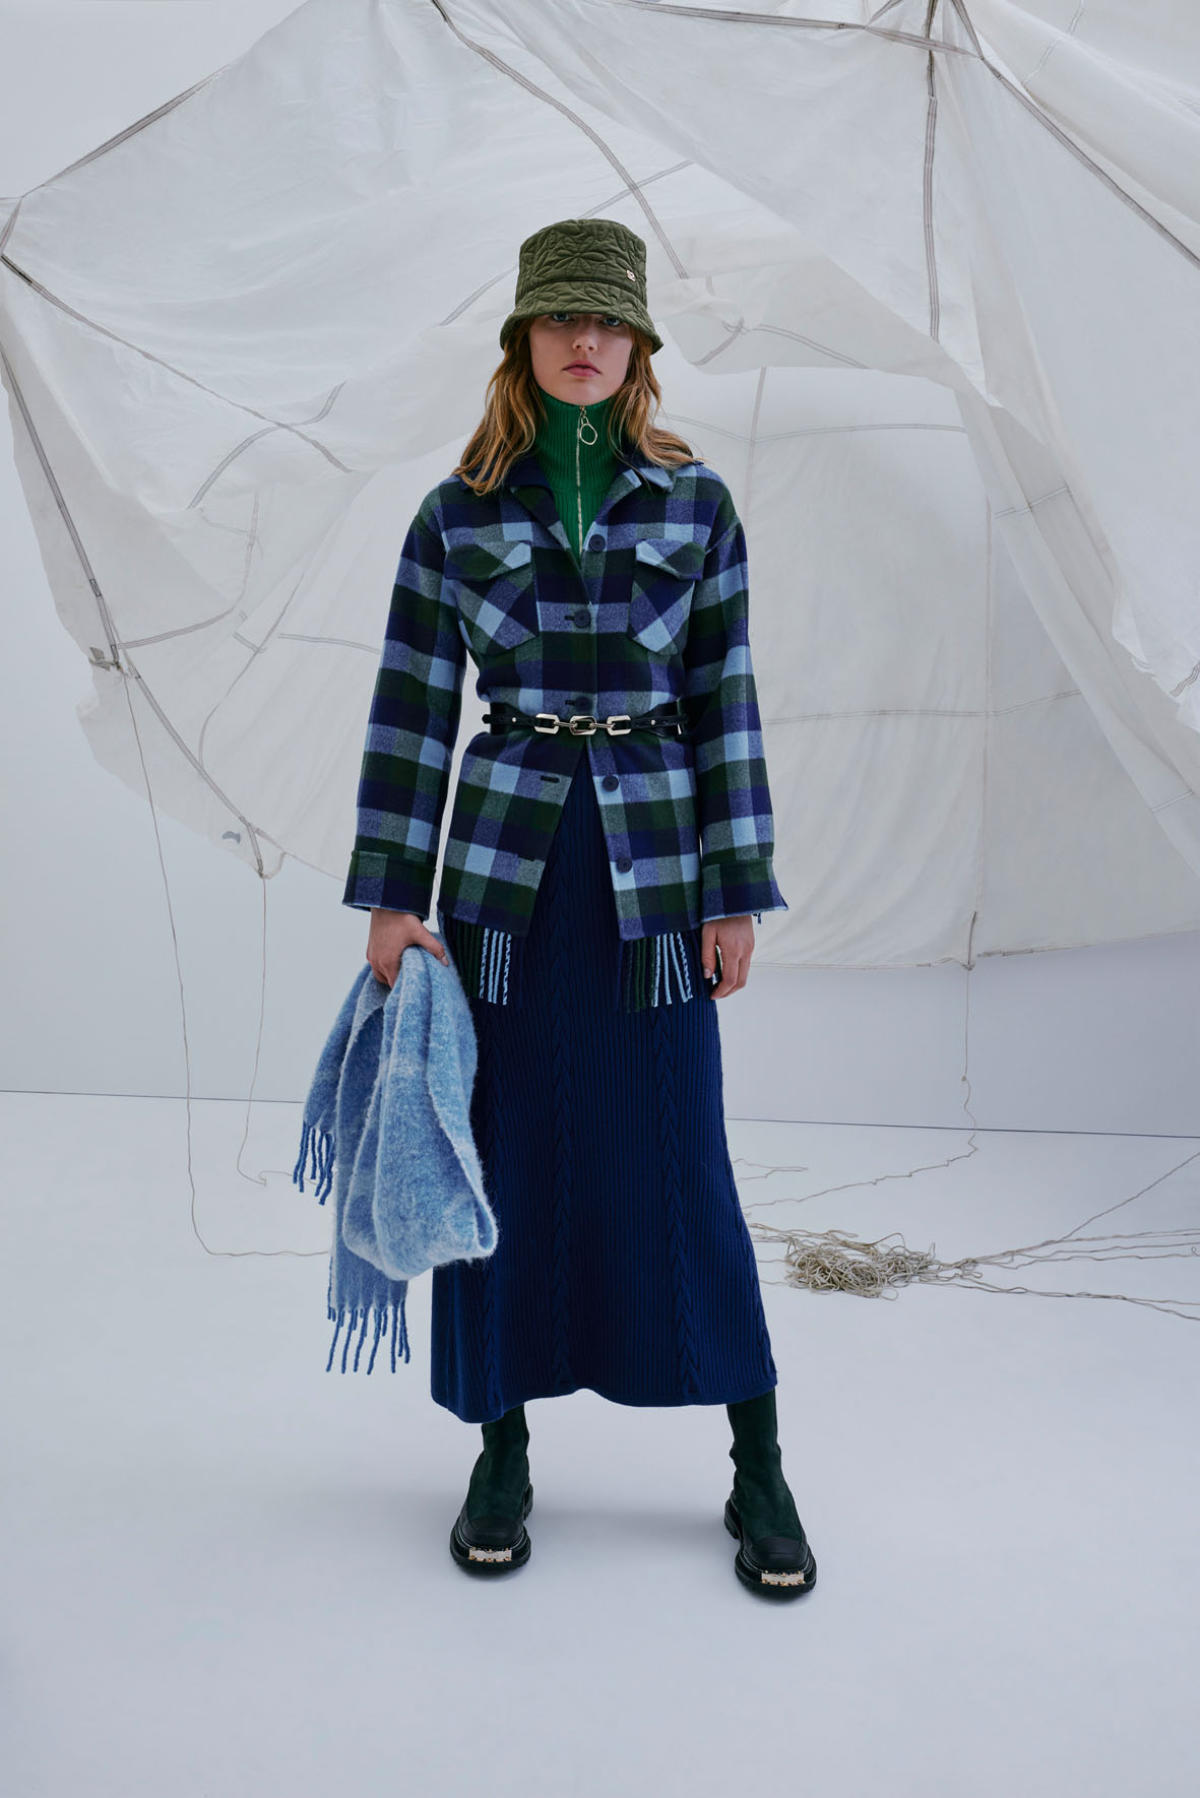 Sandro Presents Its New Fall/Winter 2022 Women Collection